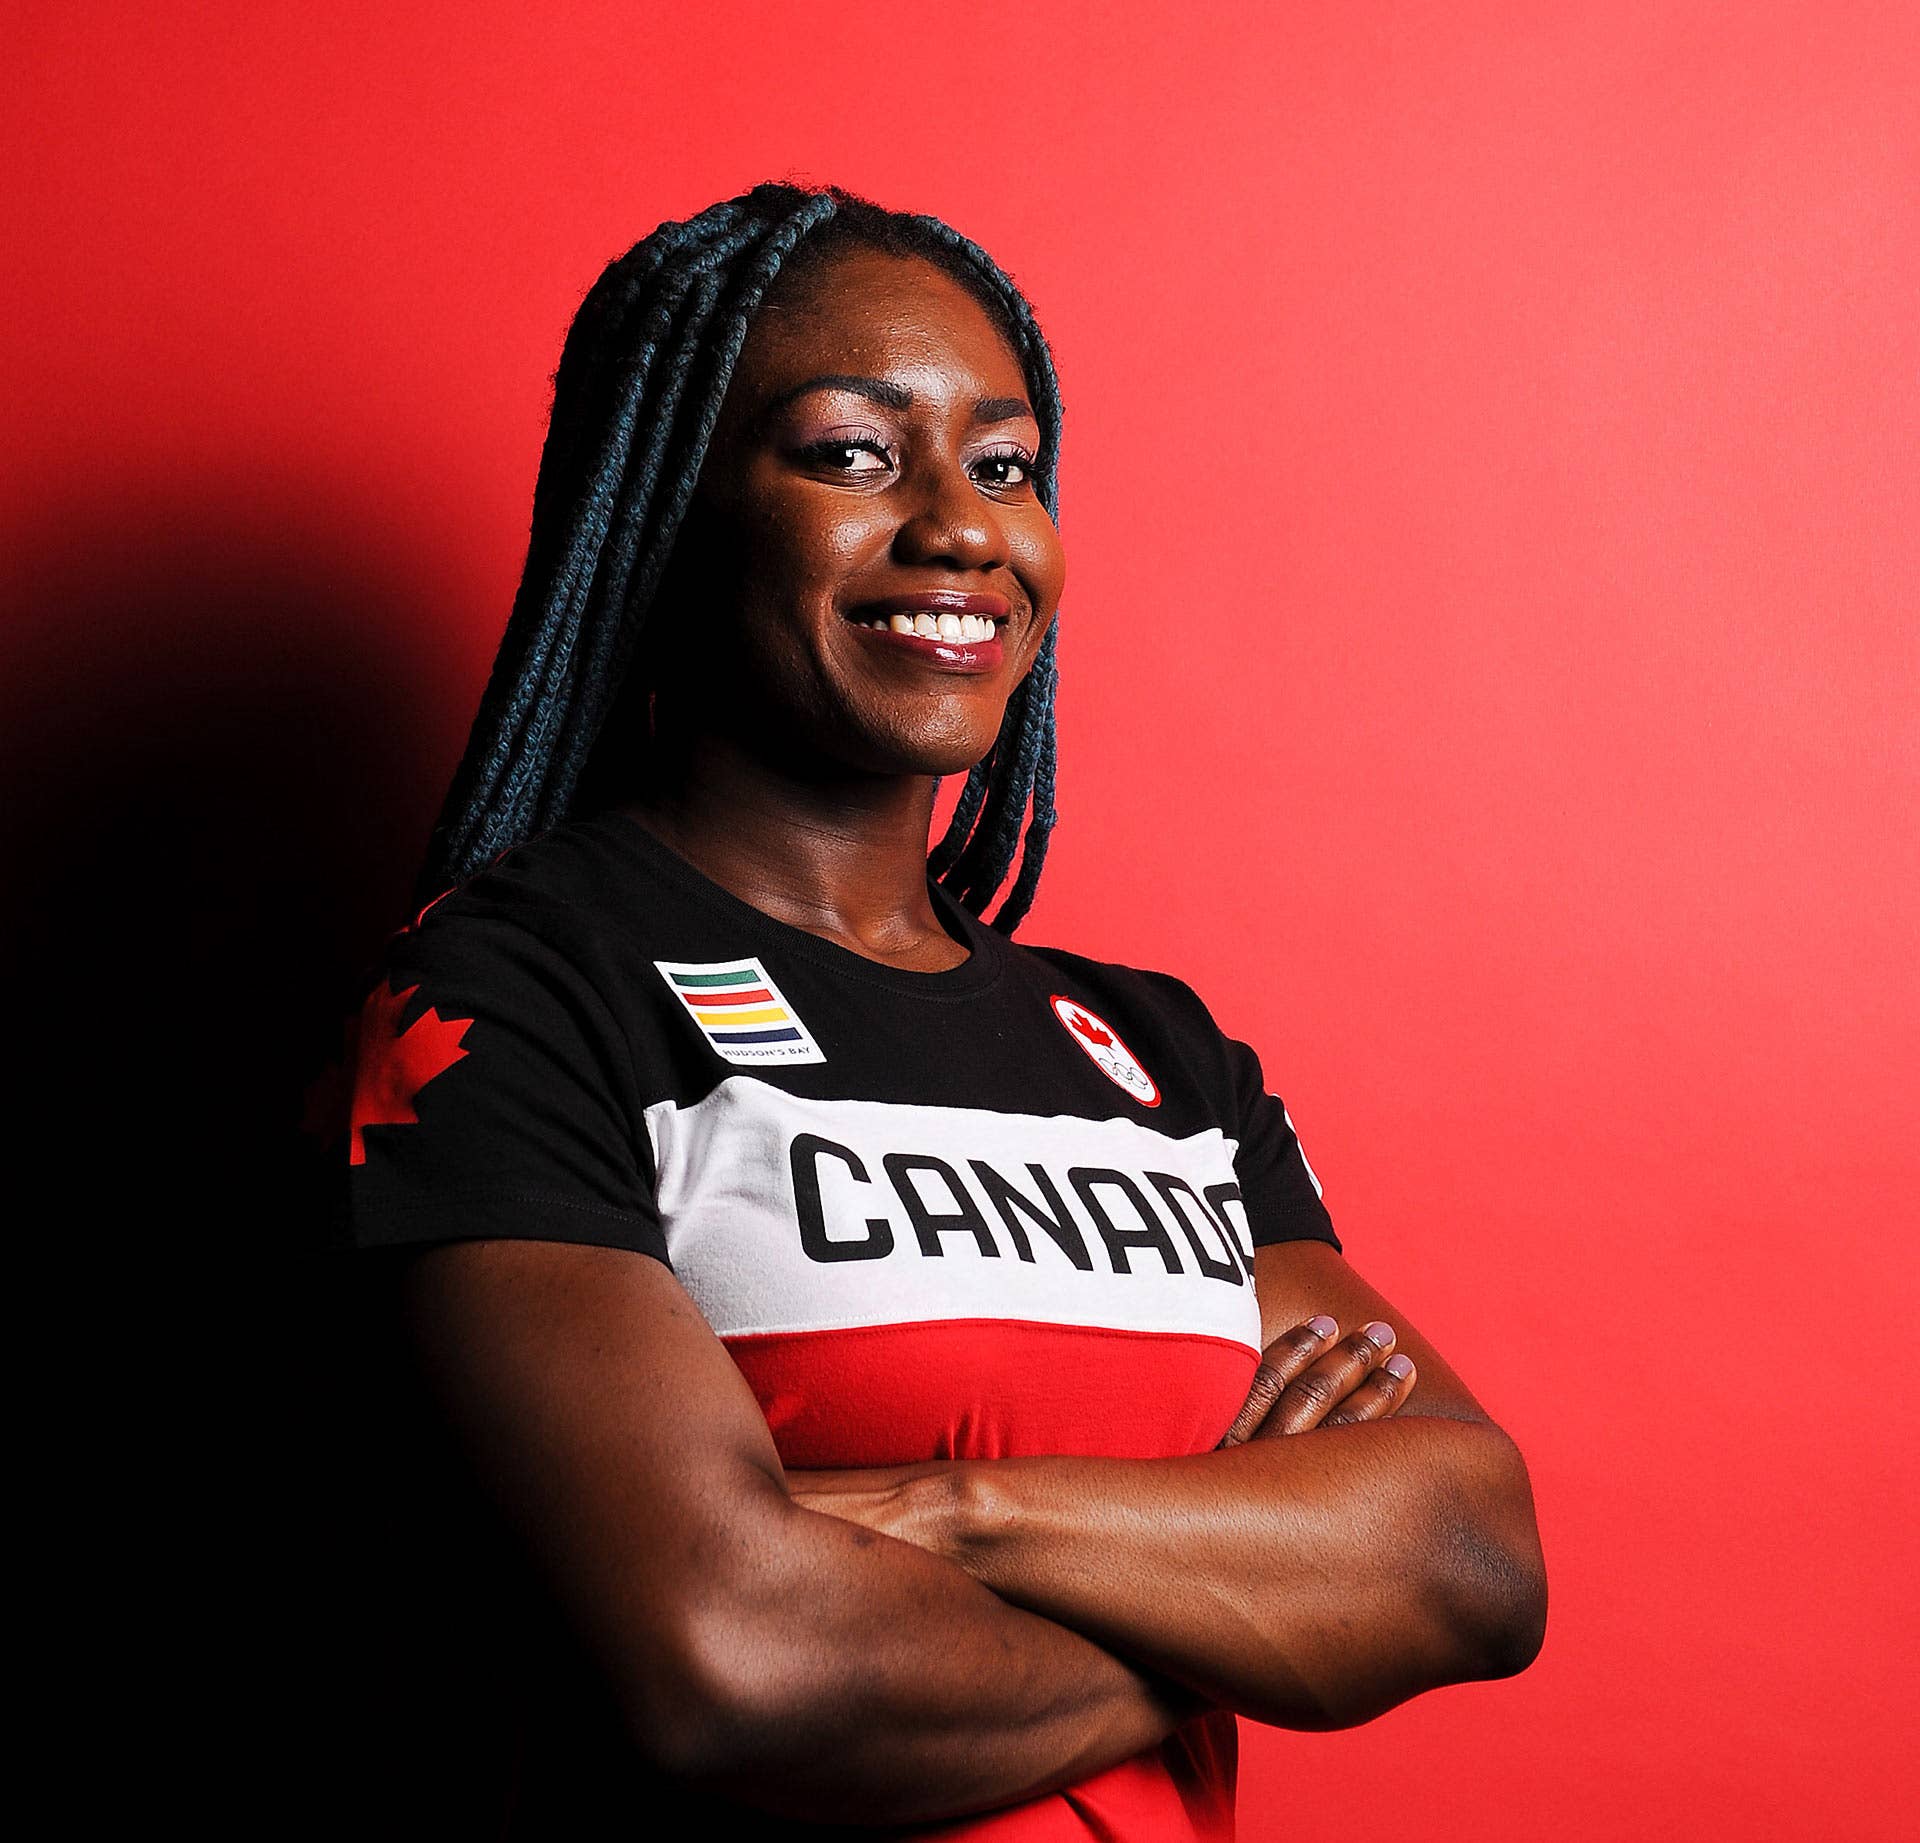 Canadina bobsledder Cynthia Appiah poses against red background